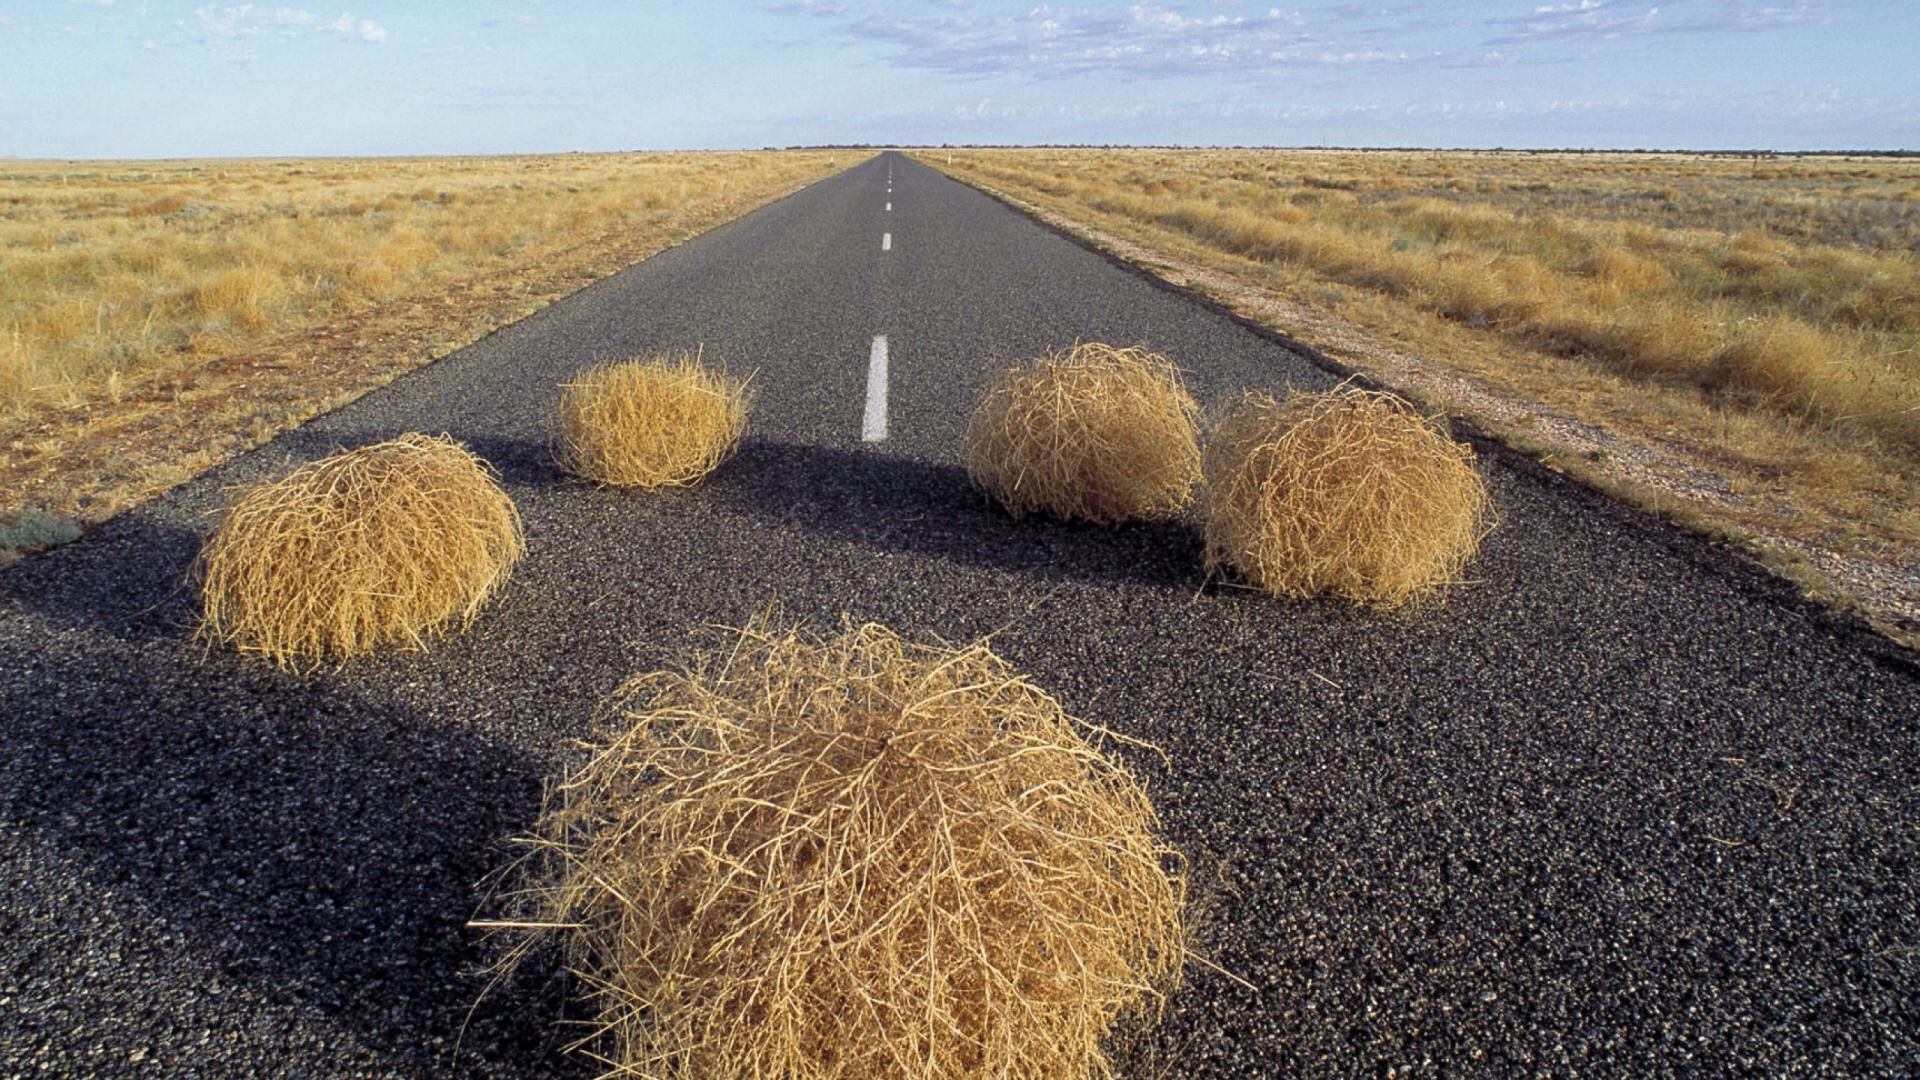 TUMBLEWEED – See them tumbling down, pledging their love to the ground;  lonely but free I'll be found, drifting along with the tumbling tumbleweeds.